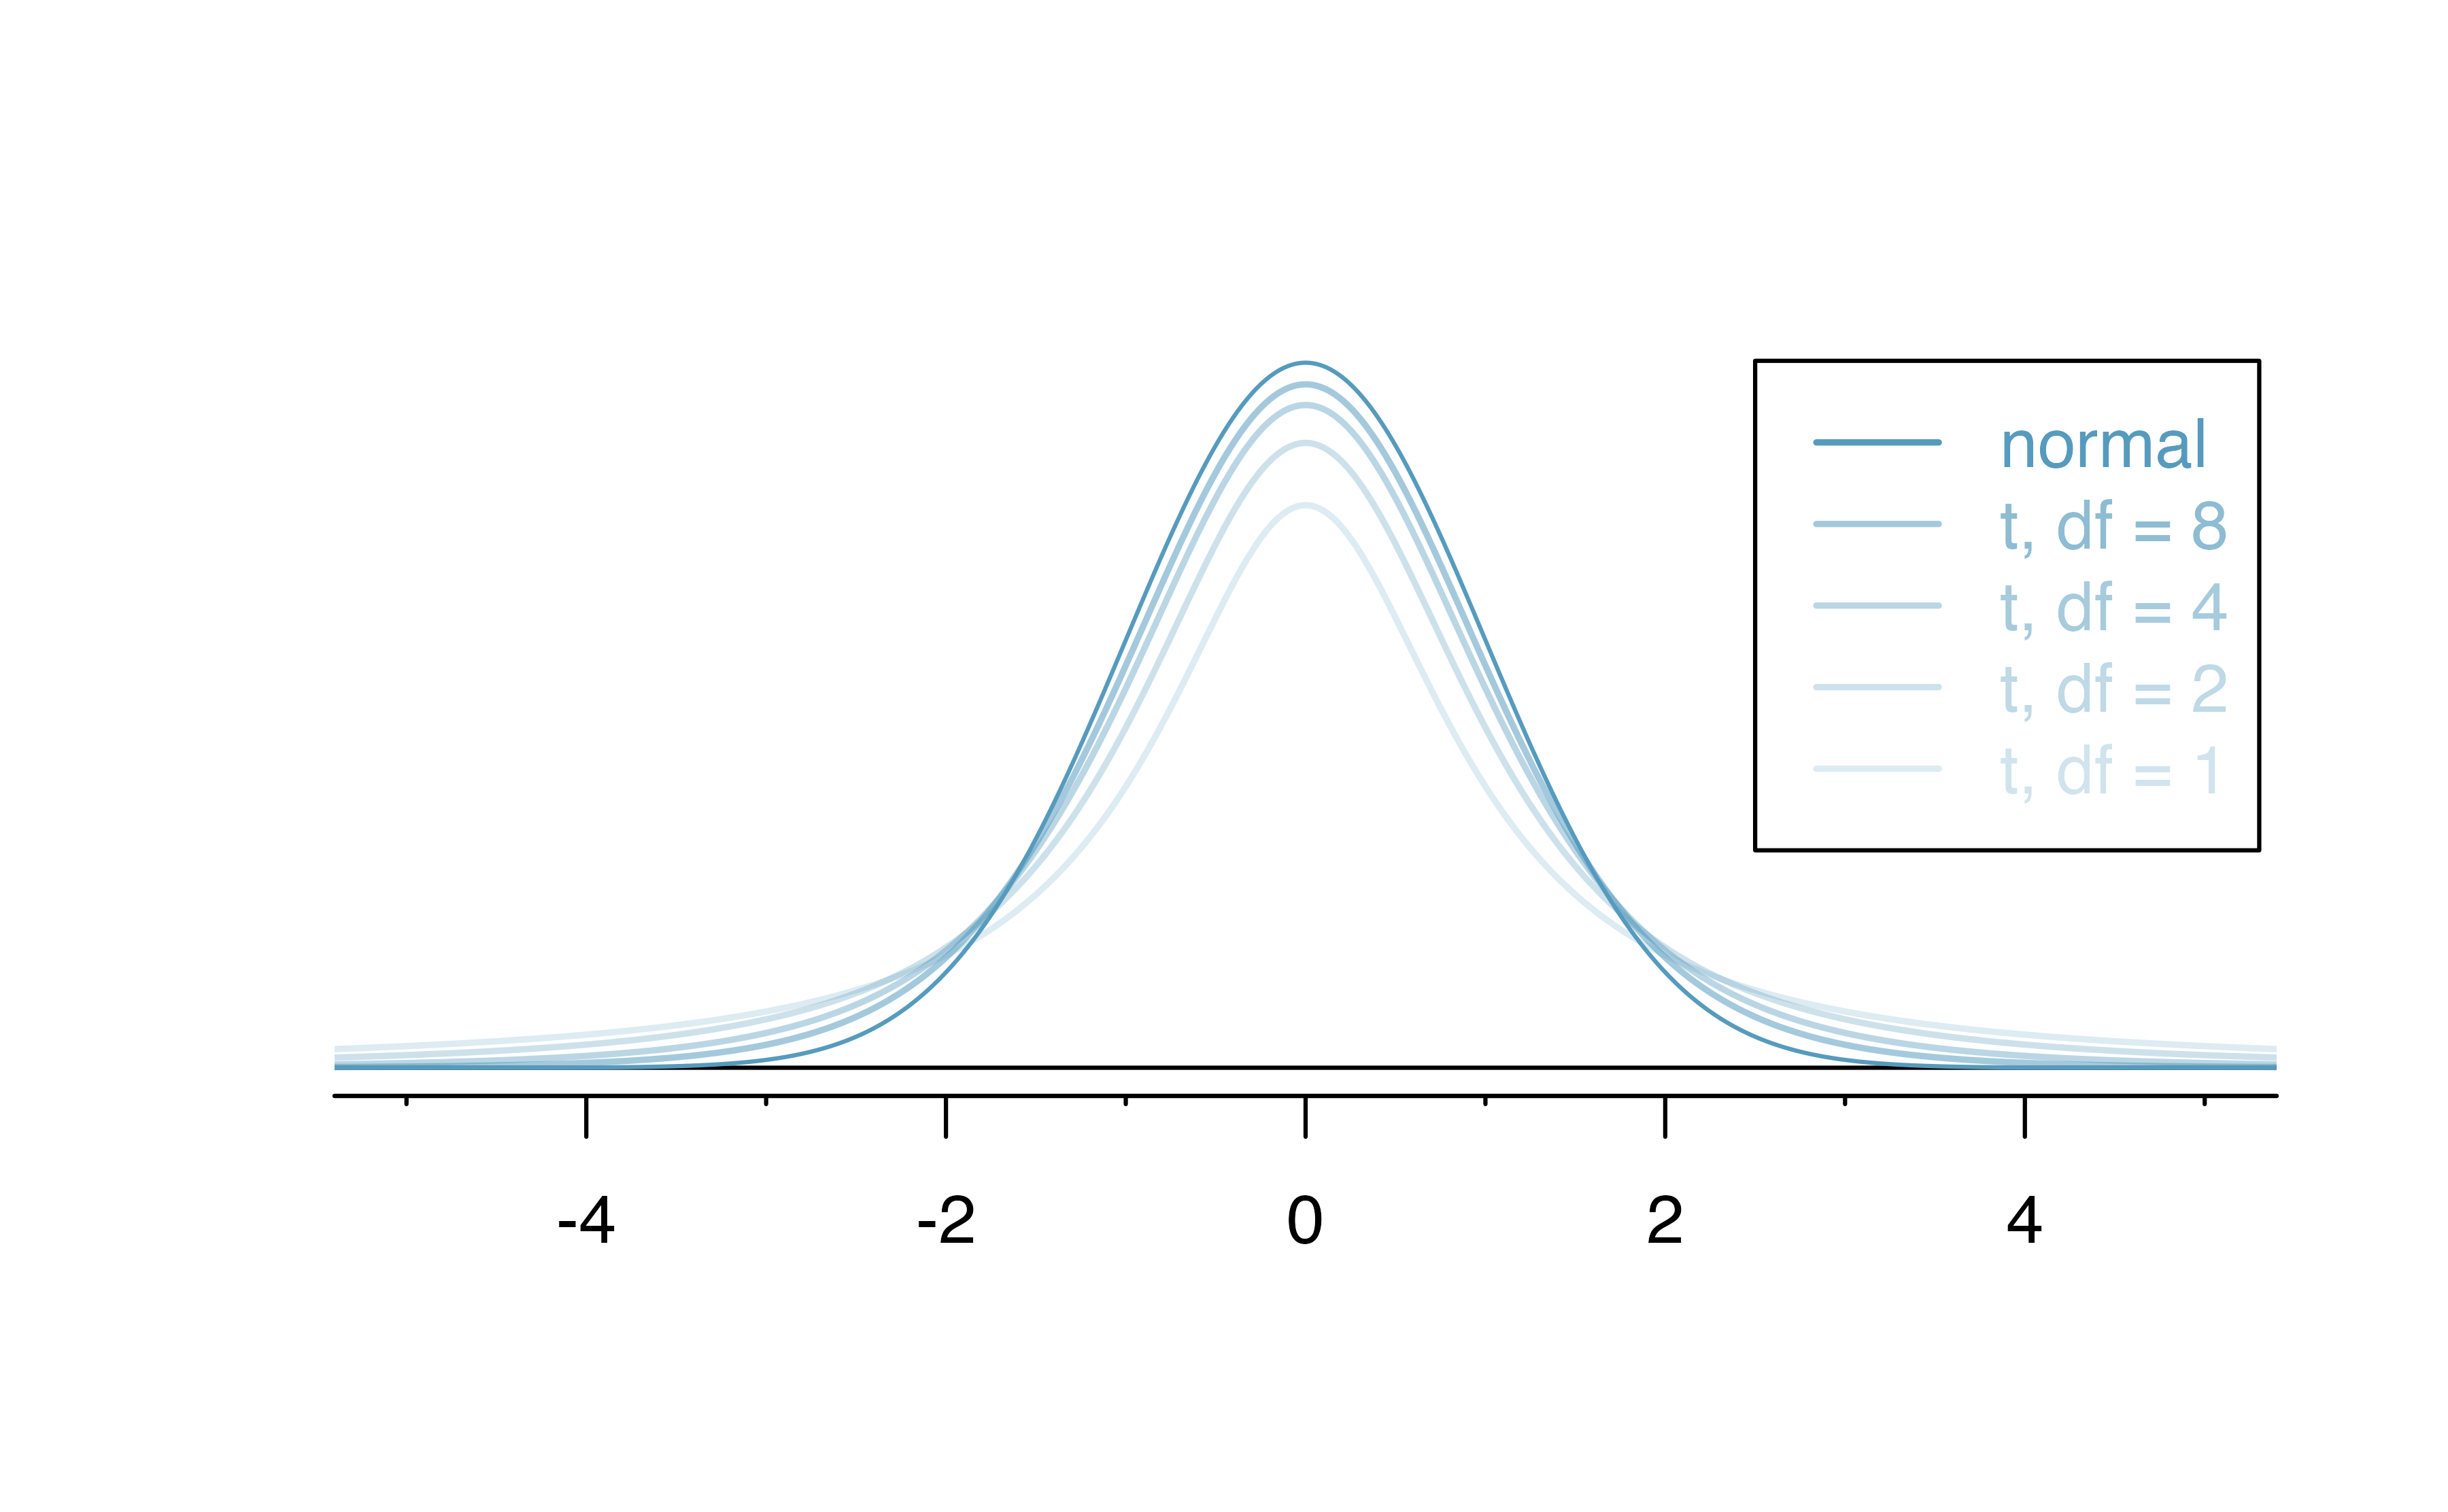 The larger the degrees of freedom, the more closely the $t$-distribution resembles the standard normal distribution.